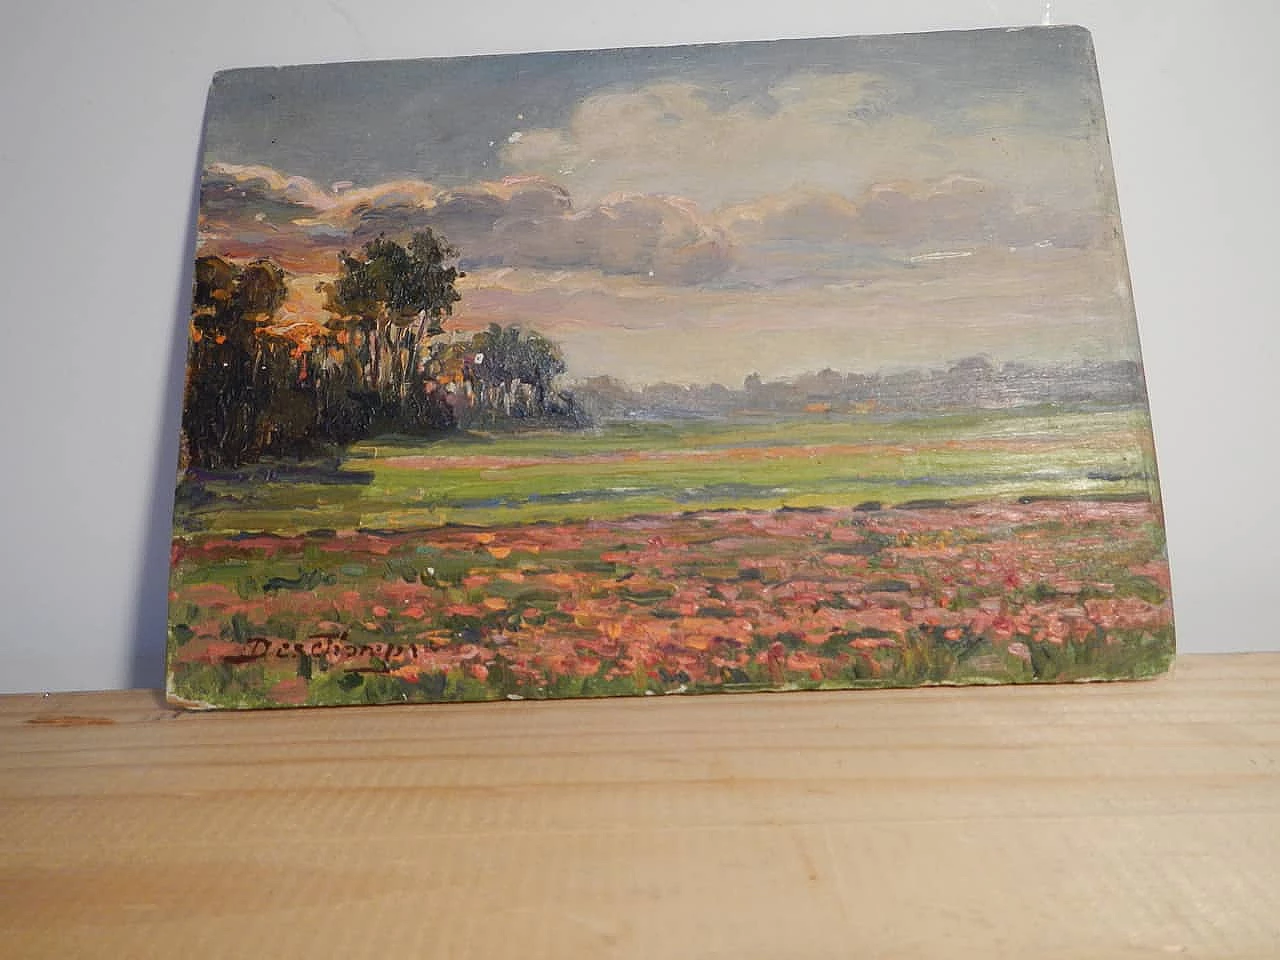 Des Champs, sunset on field, painting on wood, early 20th century 13